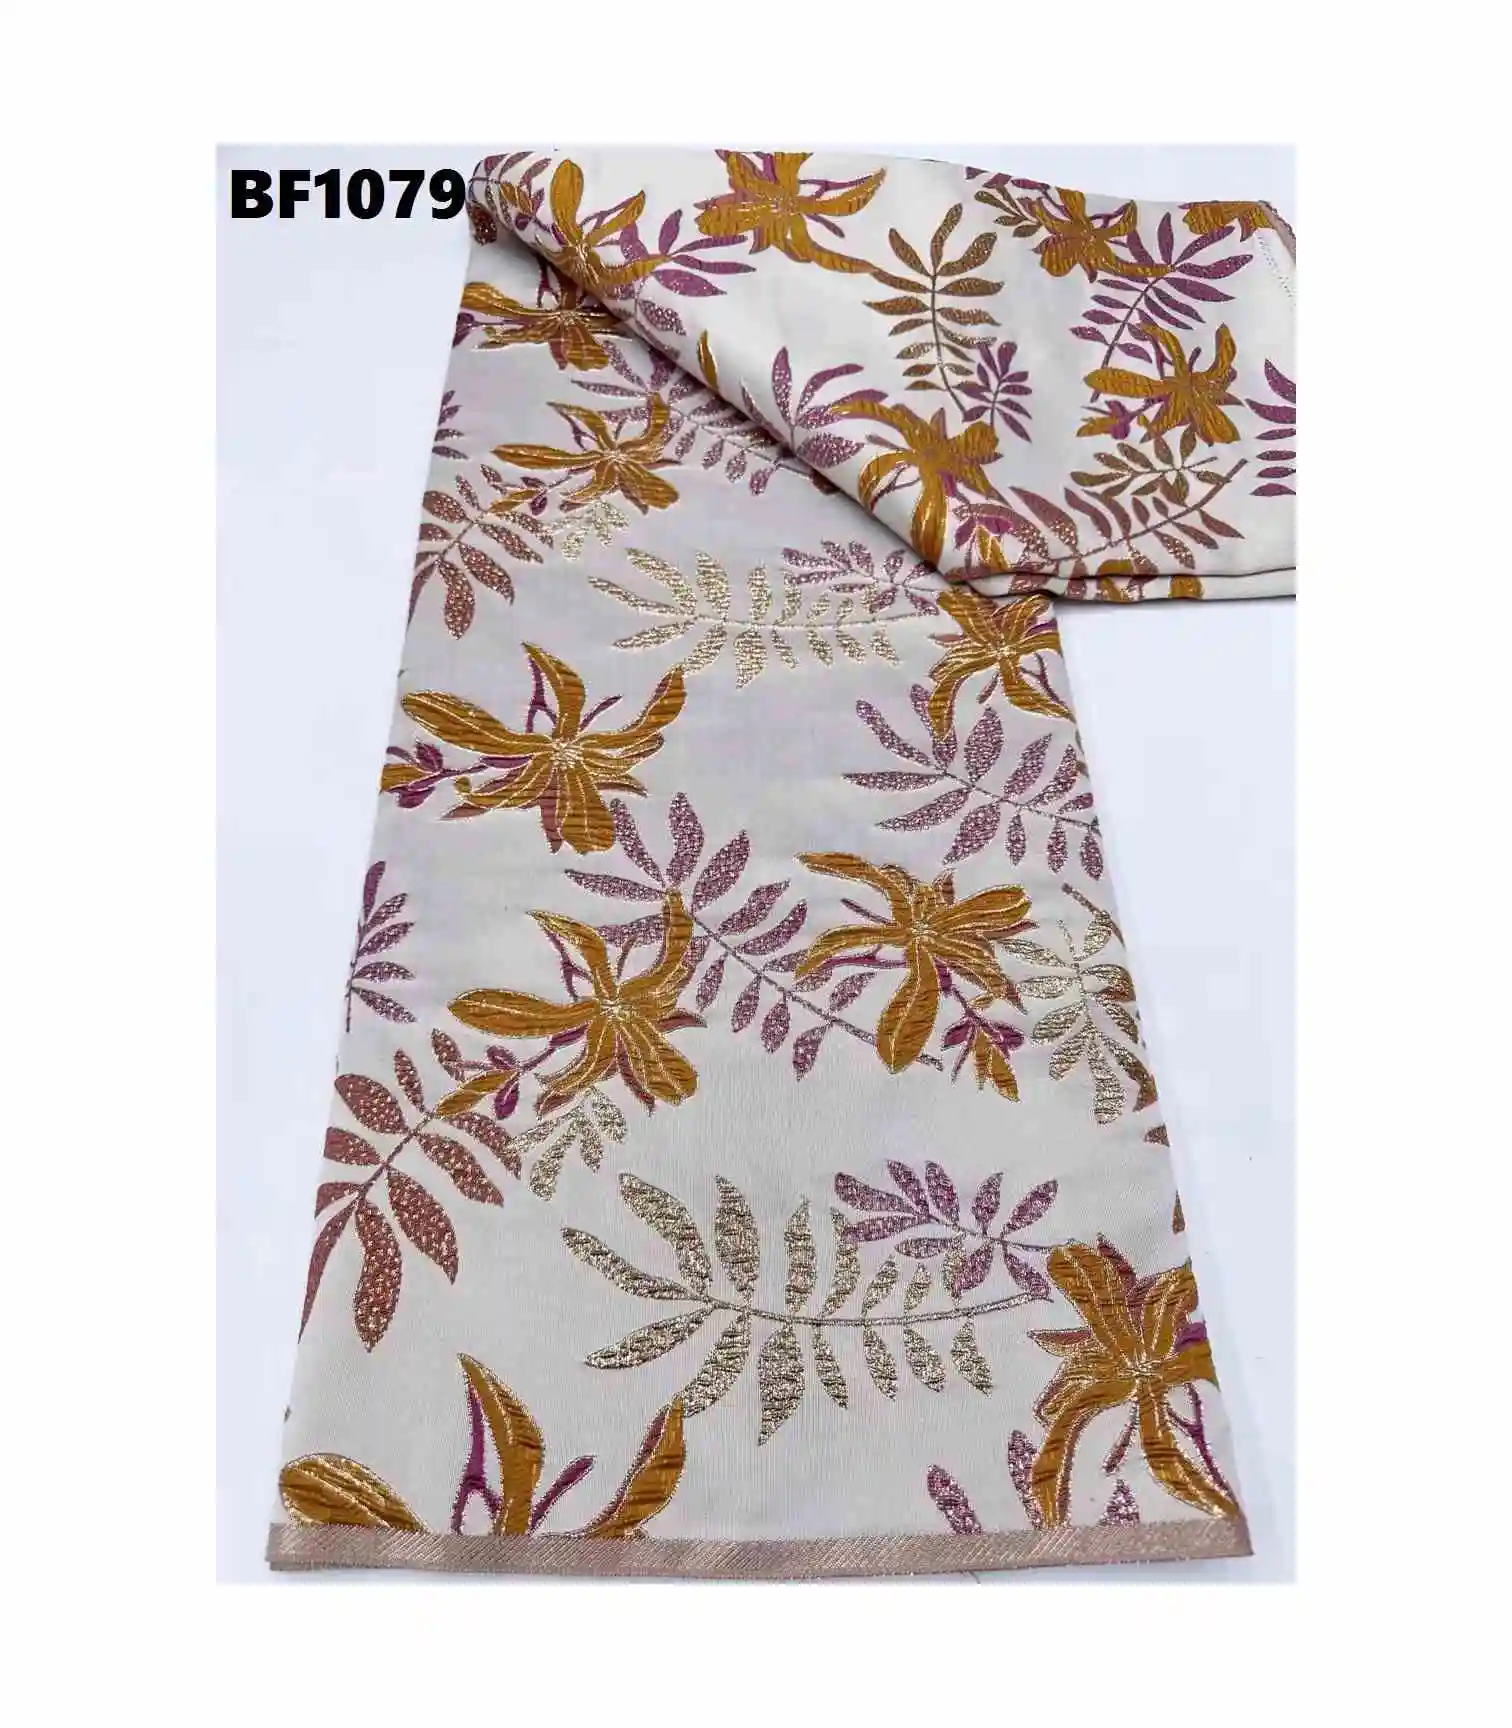 Embroidery High Quality Bazin Brocade Fabric Damask Lace Dress 2023 African Fashion Jacquard Brocade Printed Knitted Warp